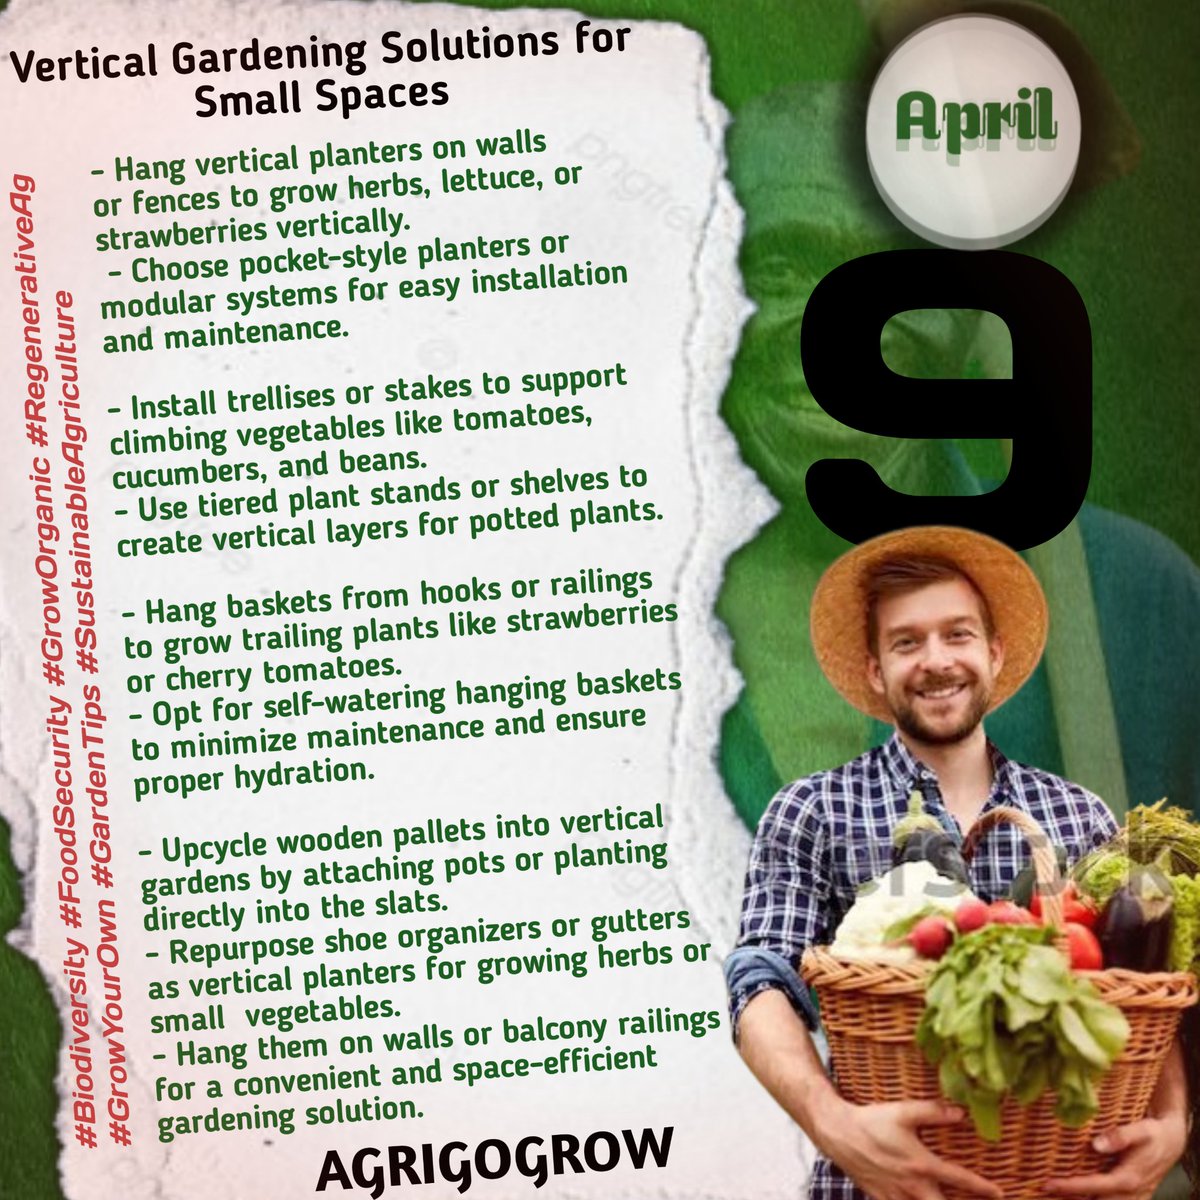 Limited space doesn't have to mean limited gardening opportunities. Vertical gardening offers innovative ways to grow vegetables and herbs, even in the smallest of spaces. Here are some creative ideas to maximize your gardening potential
#SustainableAgriculture
#FarmingTips